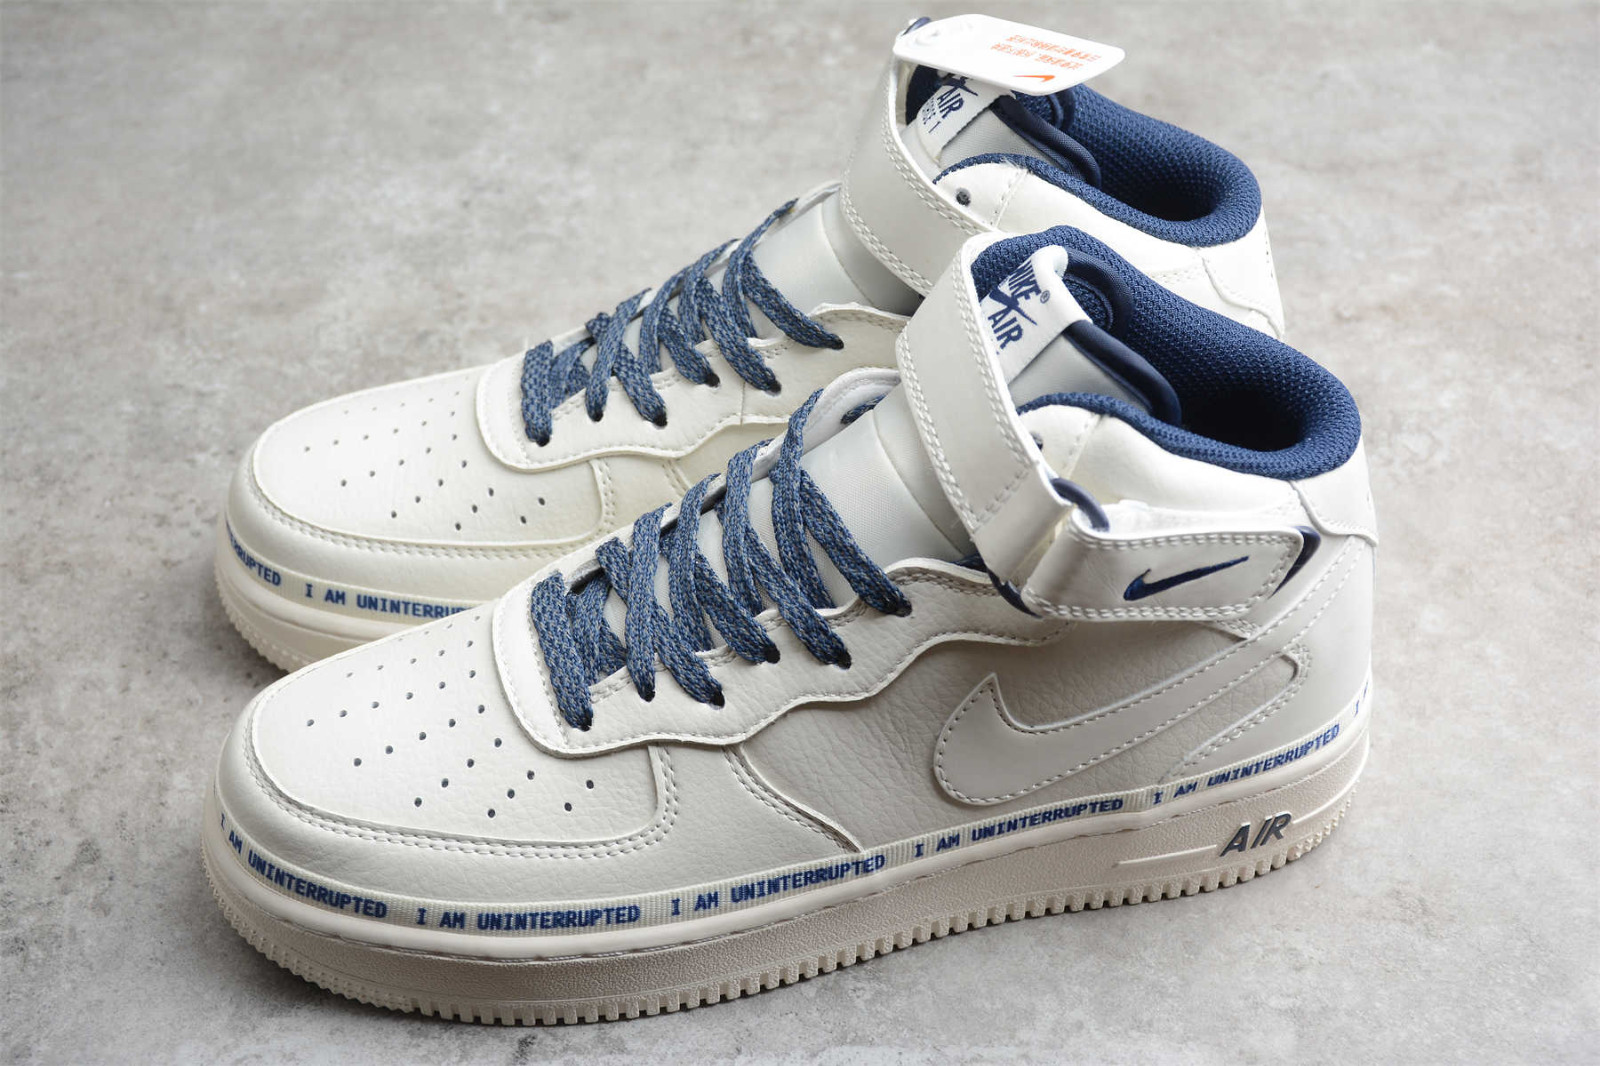 Uninterrupted x Nike pack Air Force 1 07 Mid White Blue NU8802 - 303 - old nike pack grey and color sheet 2017 - StclaircomoShops